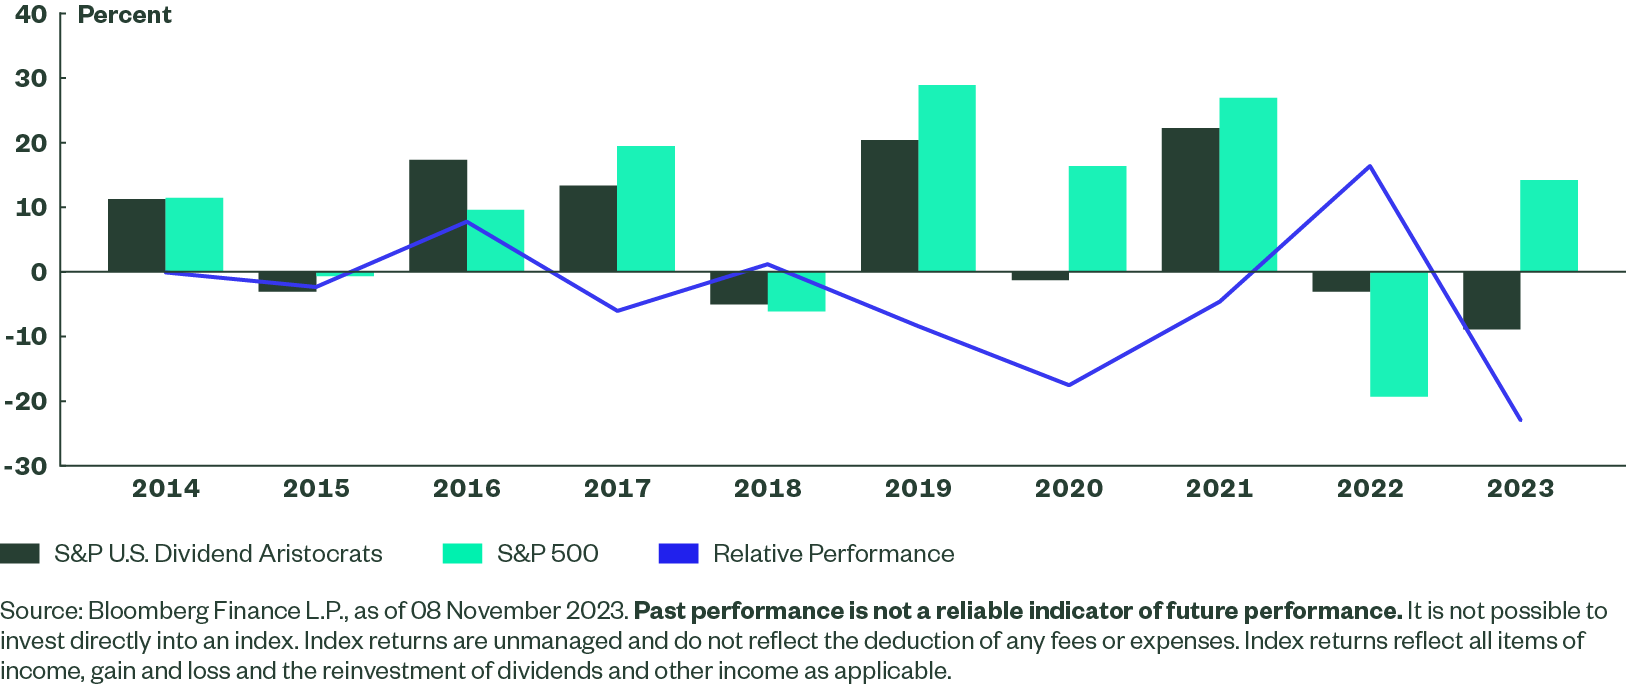 Comparing capital price returns for the past 10 years for both the S&P 500 and the S&P US Dividend Aristocrats, and a line to show their relative performance.